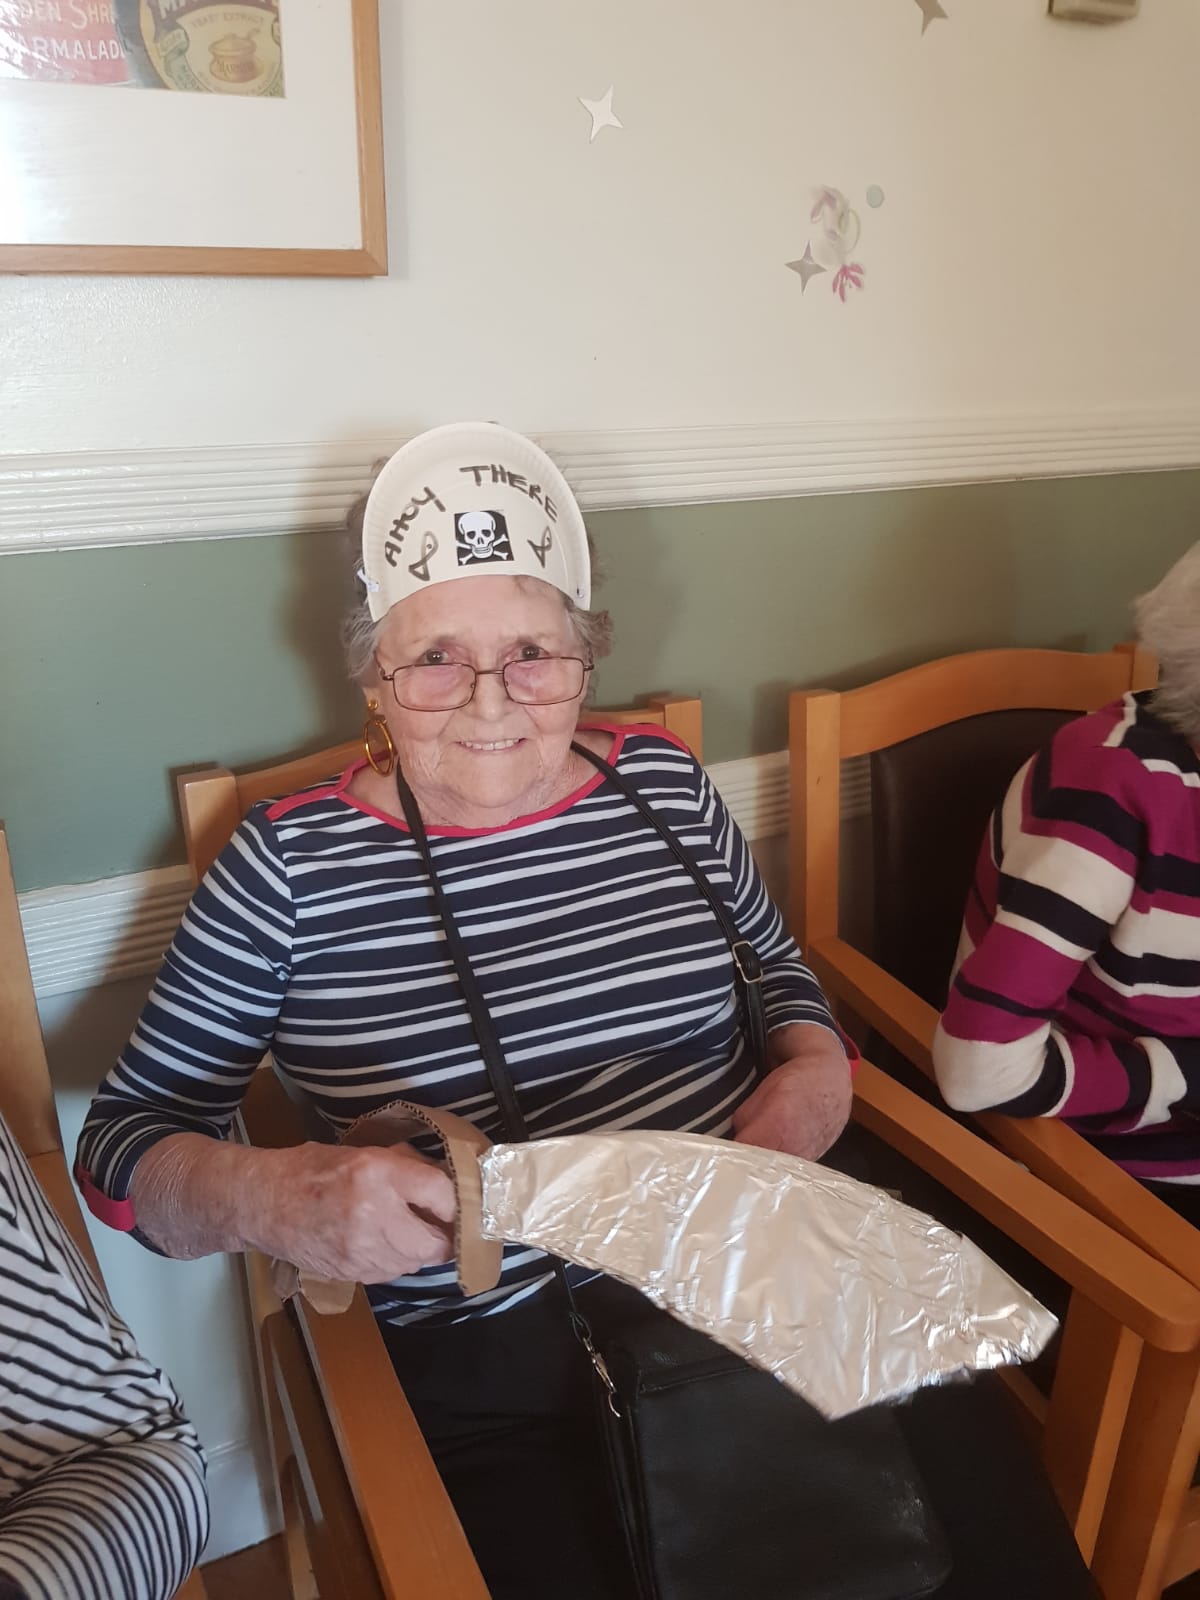 Pirate at Elizabeth Court: Key Healthcare is dedicated to caring for elderly residents in safe. We have multiple dementia care homes including our care home middlesbrough, our care home St. Helen and care home saltburn. We excel in monitoring and improving care levels.